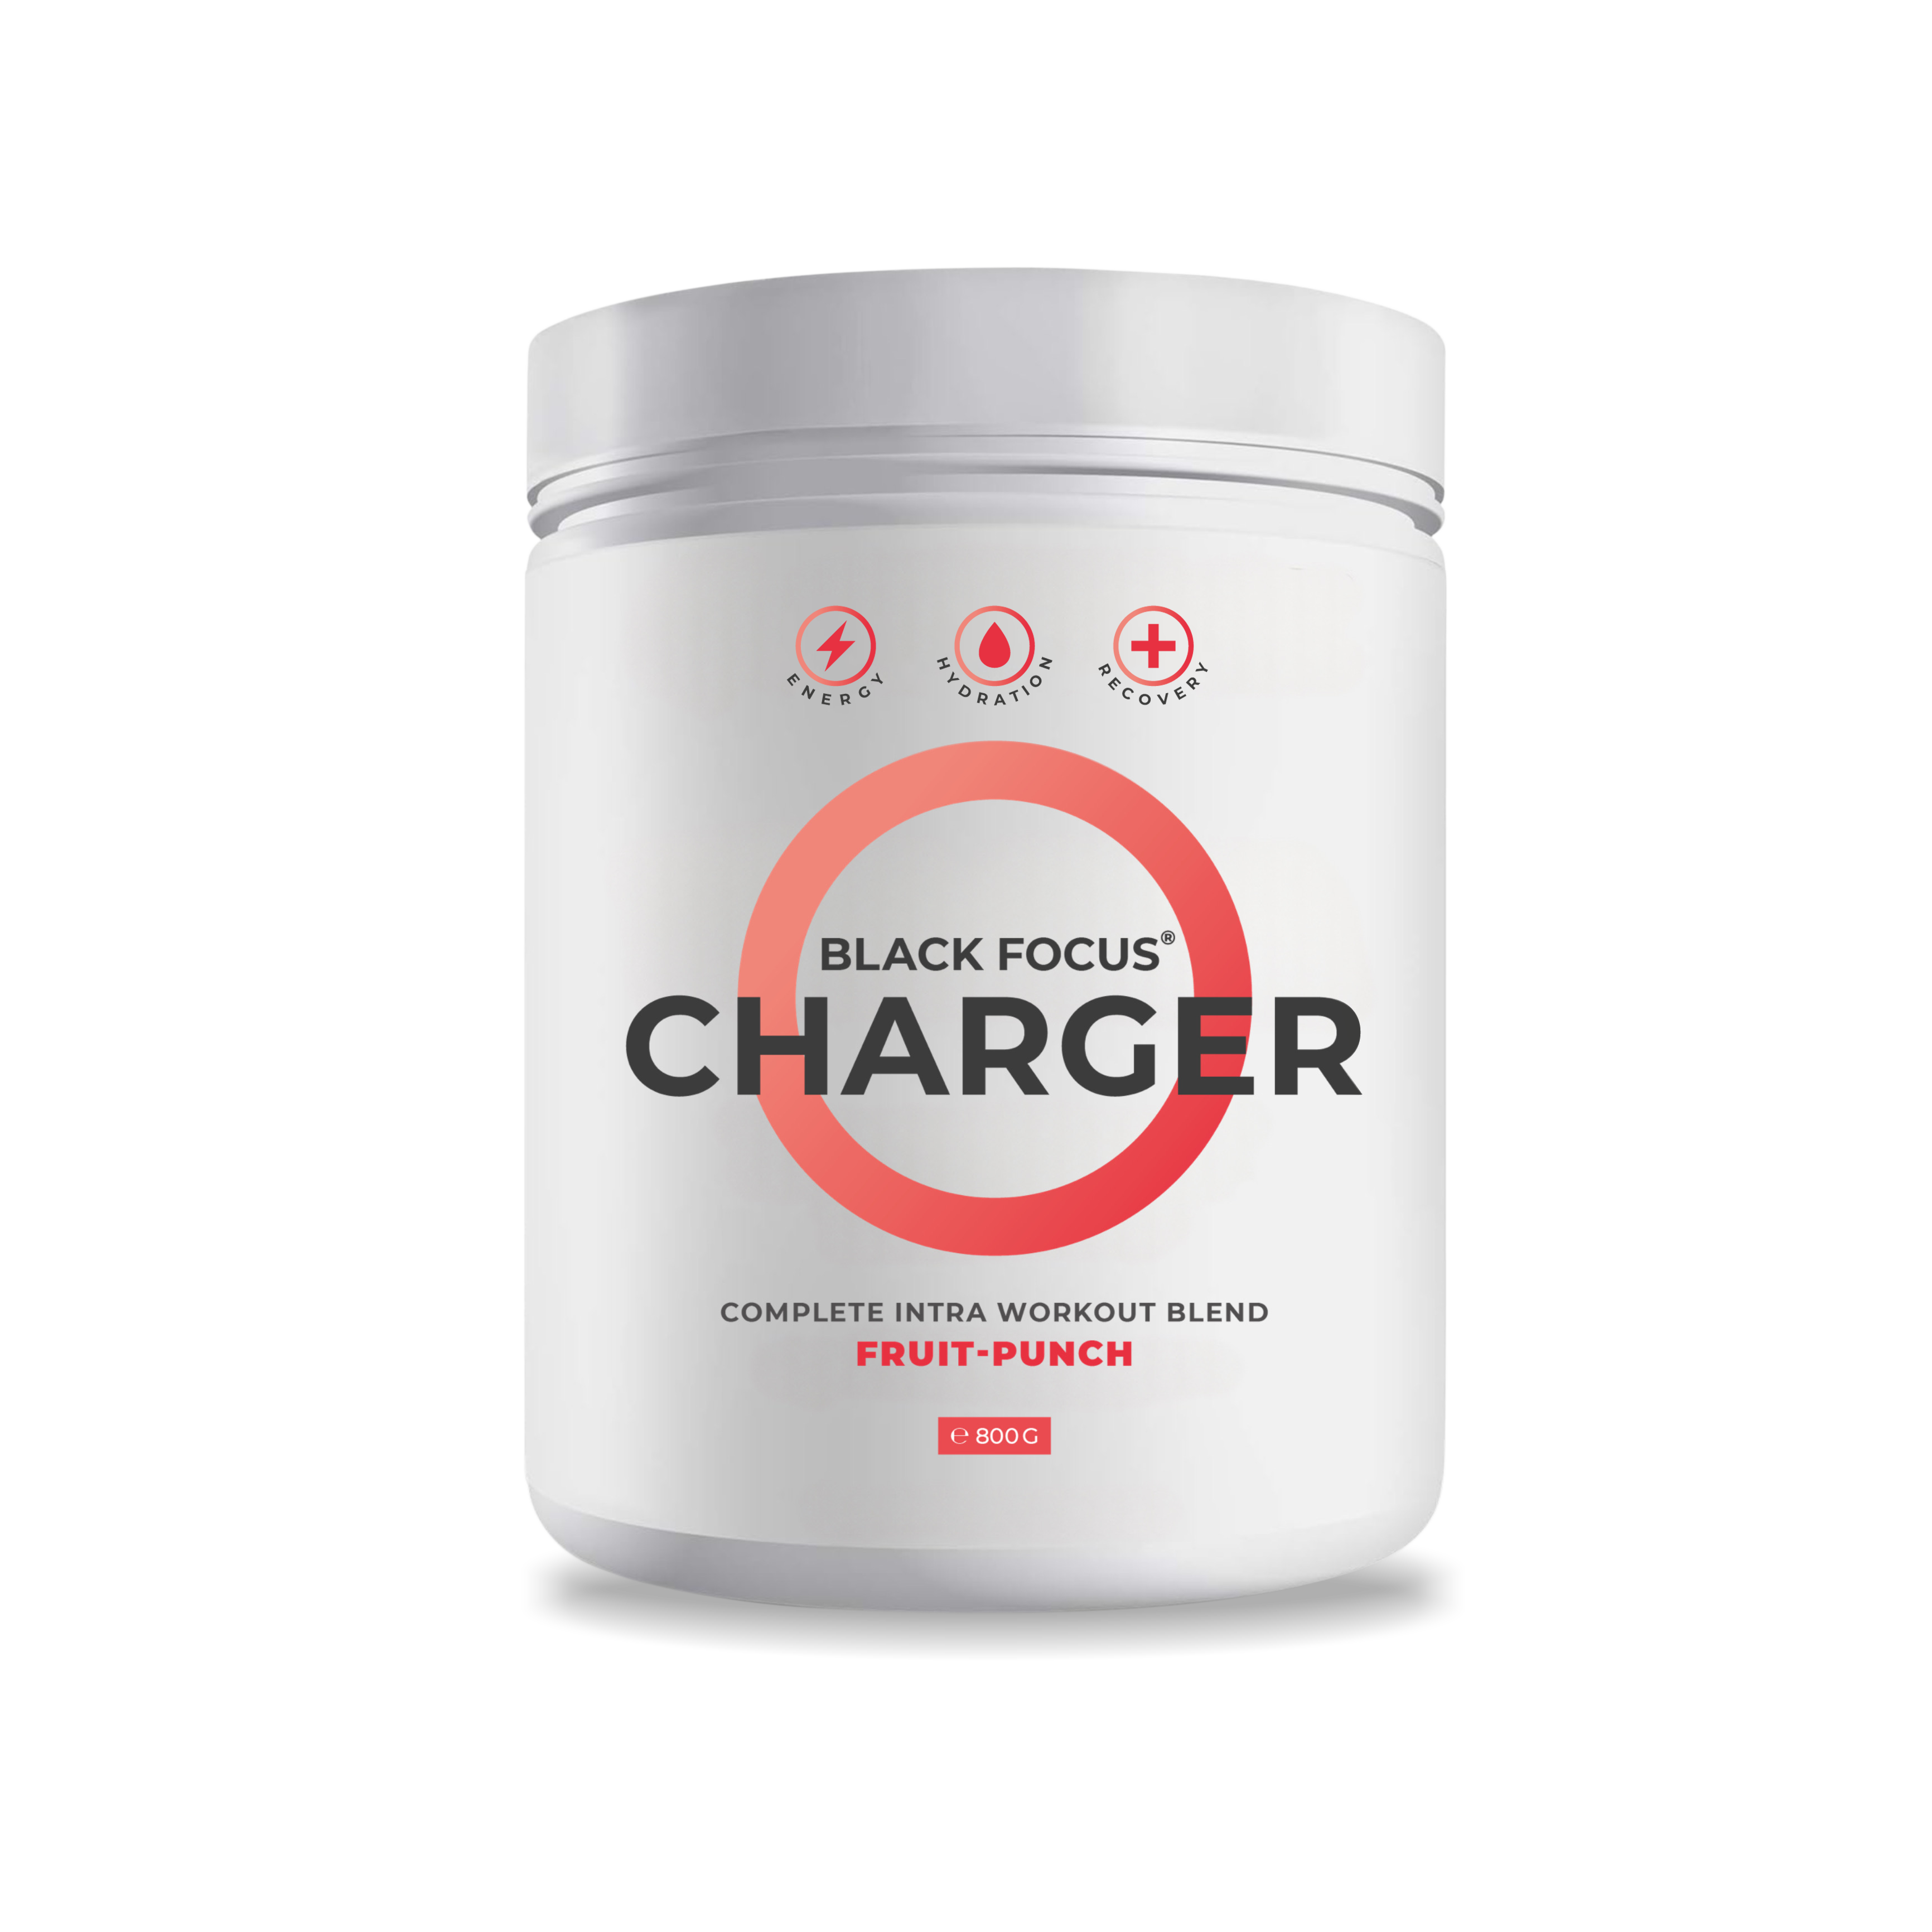 Charger - Complete Intra Workout Blend